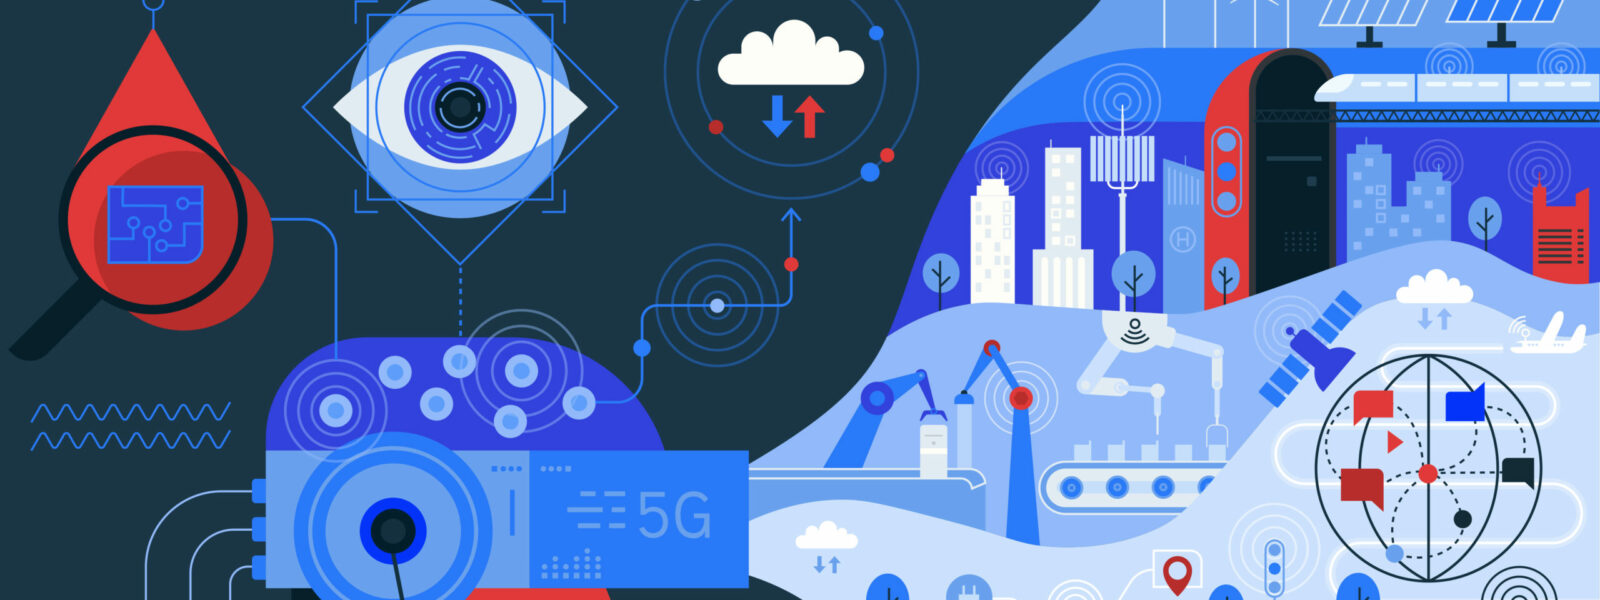 More Connected World 5G